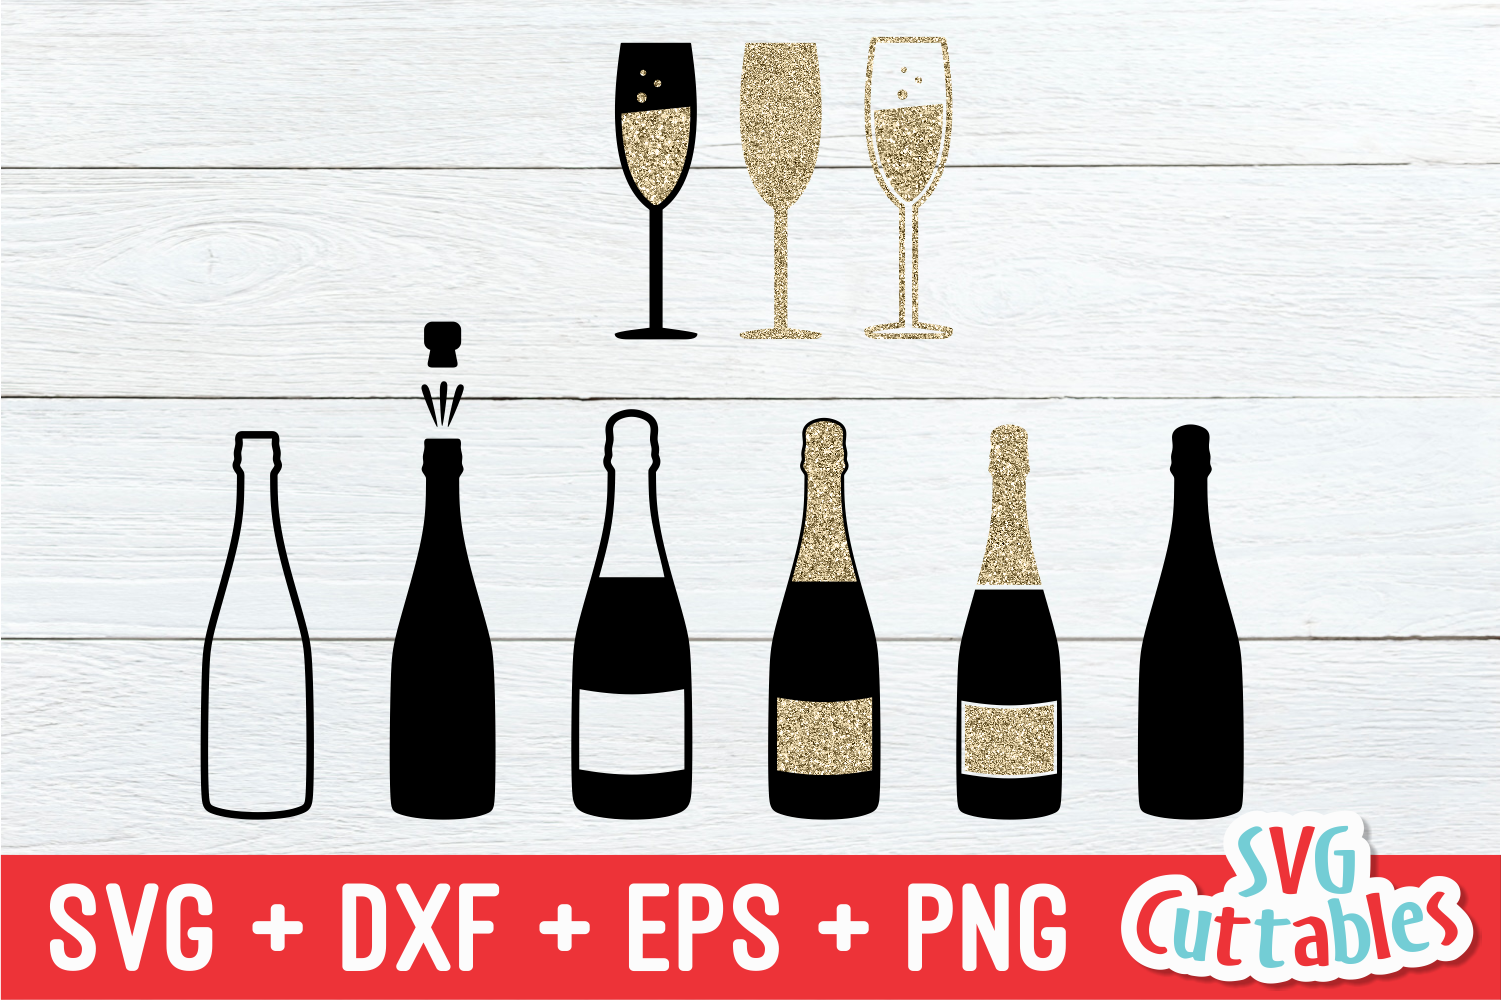 Champagne Bottles and Glasses | Cut File By Svg Cuttables ...